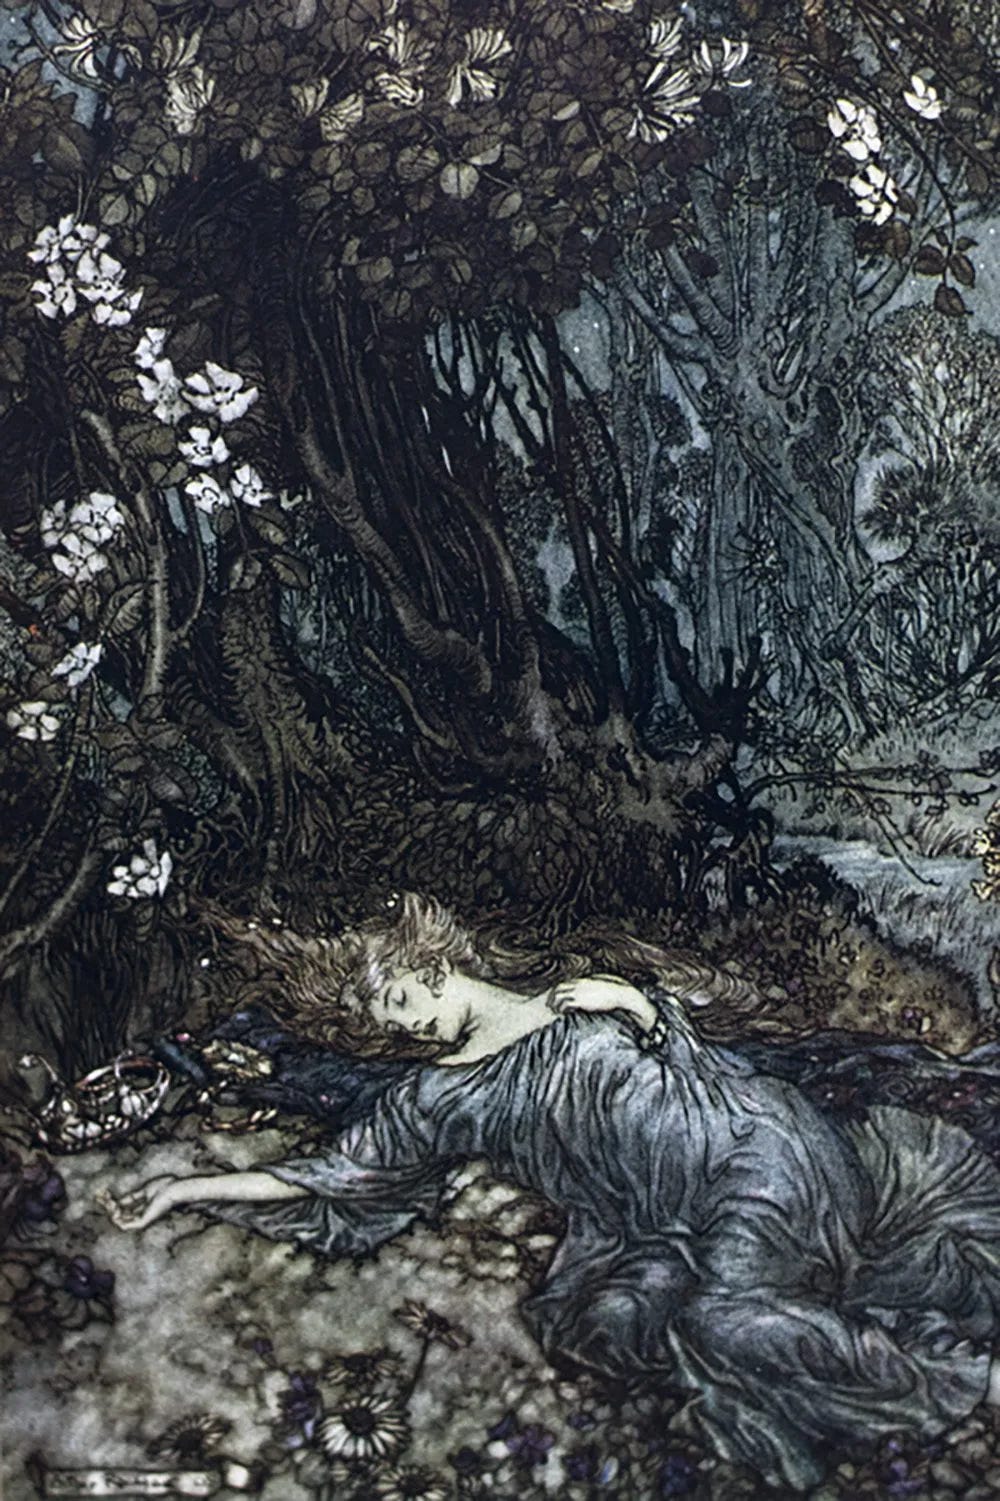 Queen Titania sleeping on a bank as described the the quote: “I know a bank where the wild thyme blows, where oxlips and the nodding violet grows, quite over-canopied with luscious woodbine, with sweet musk-roses and with eglantine.”